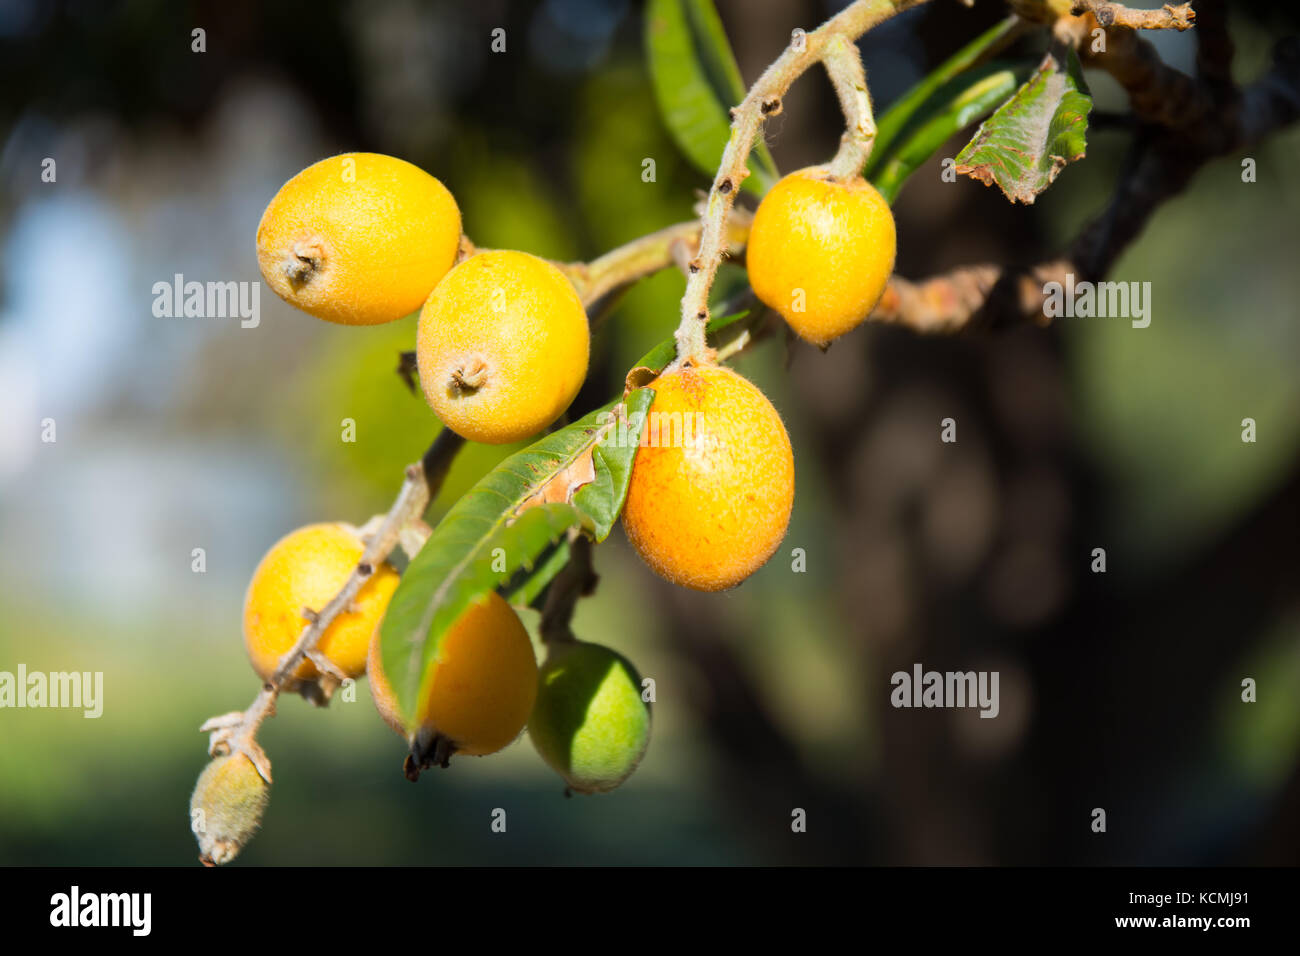 Loquat fruit,Eriobotrya japonica,also know as a Japanese Plum. Stock Photo